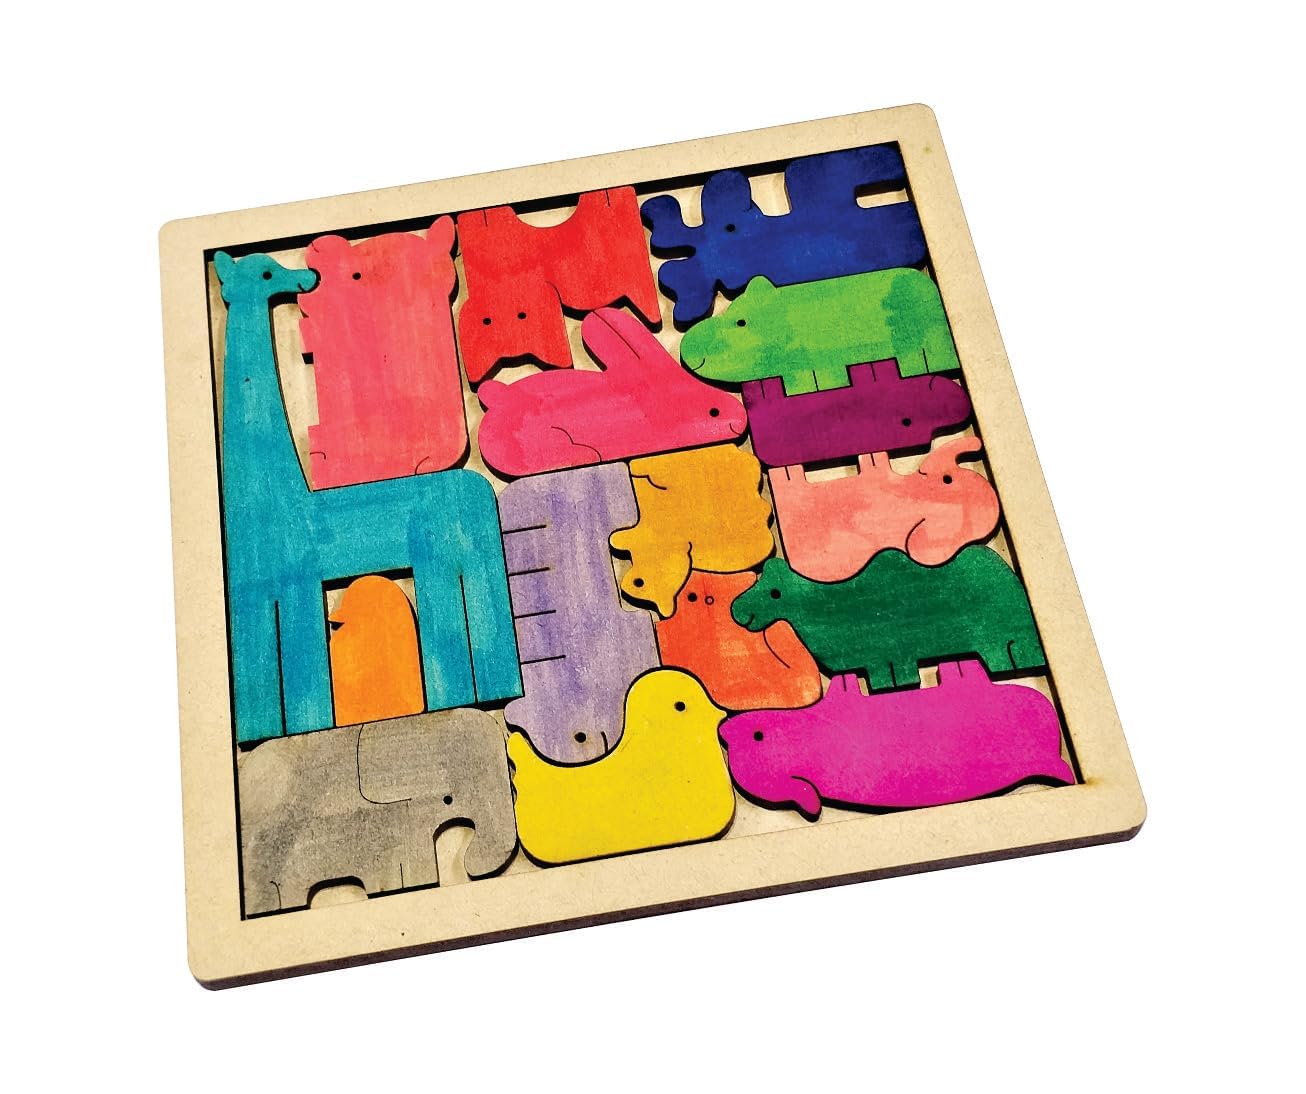 Braintastic Wooden Jigsaw Puzzle Travel Board Game Learning & Creative Educational Intelligence Brain Games Sorting Puzzle Toys for Kids (Animal Puzzle 16 PO4)